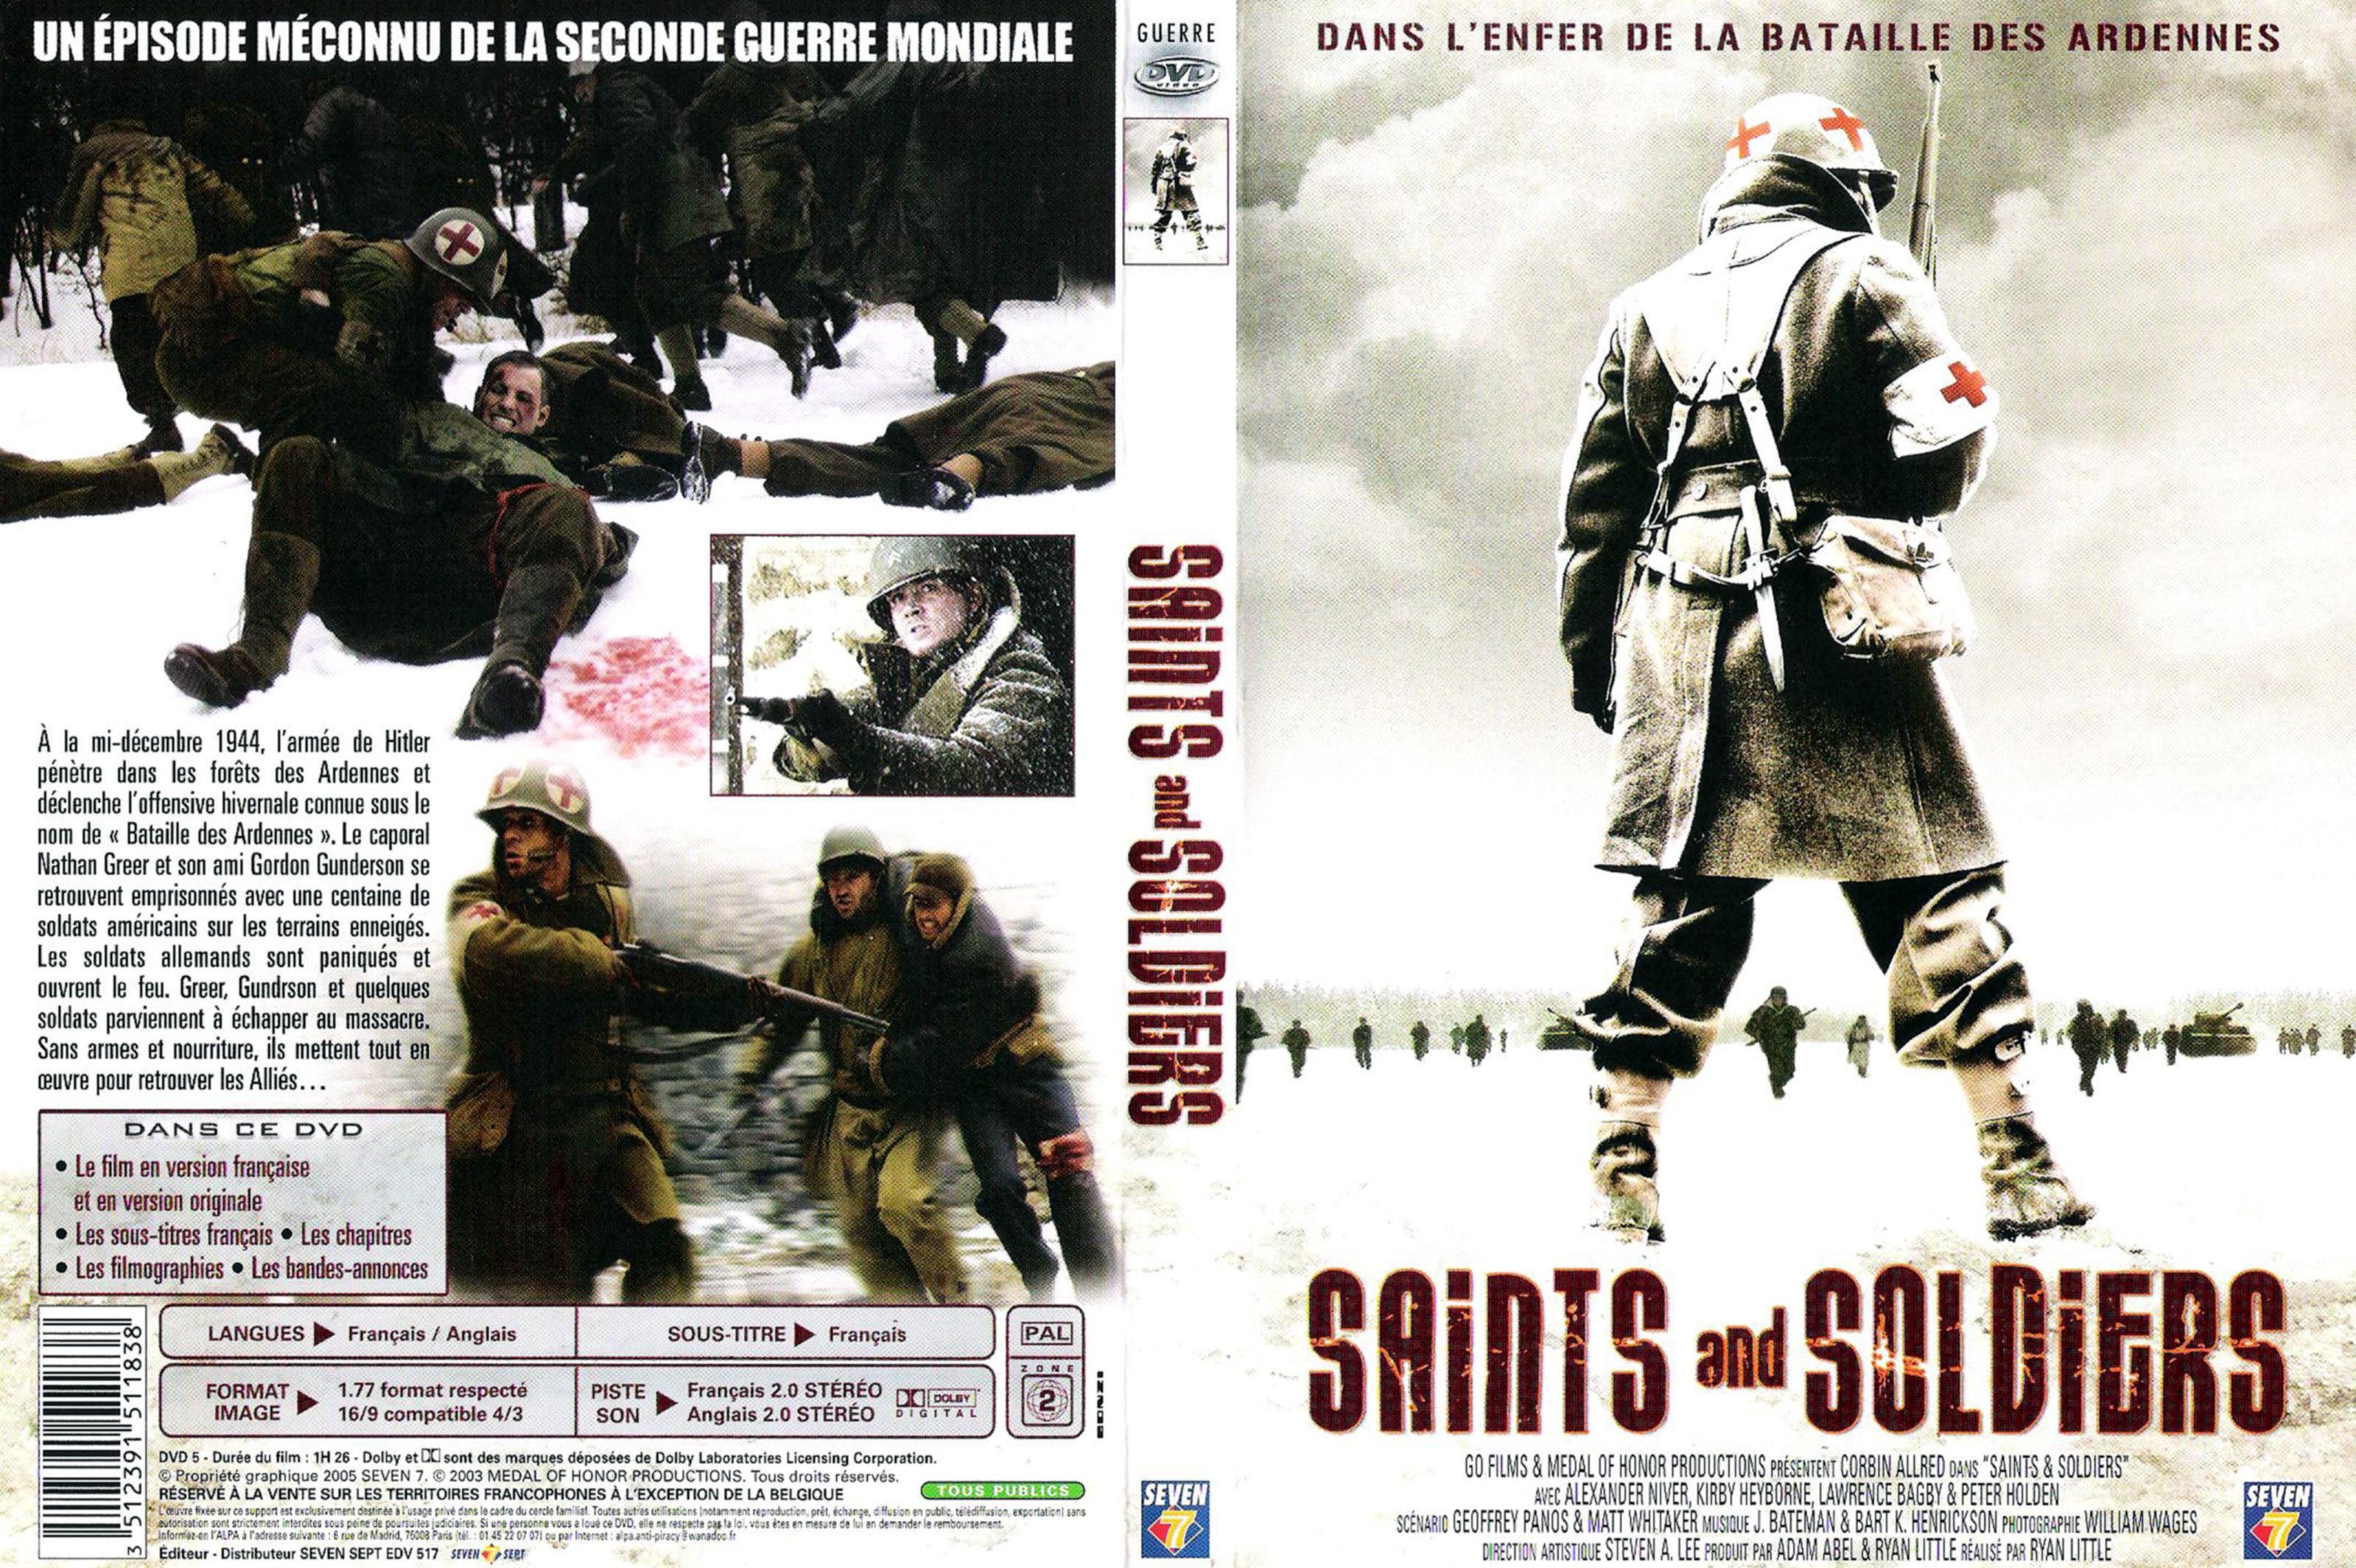 Jaquette DVD Saints and soldiers v3